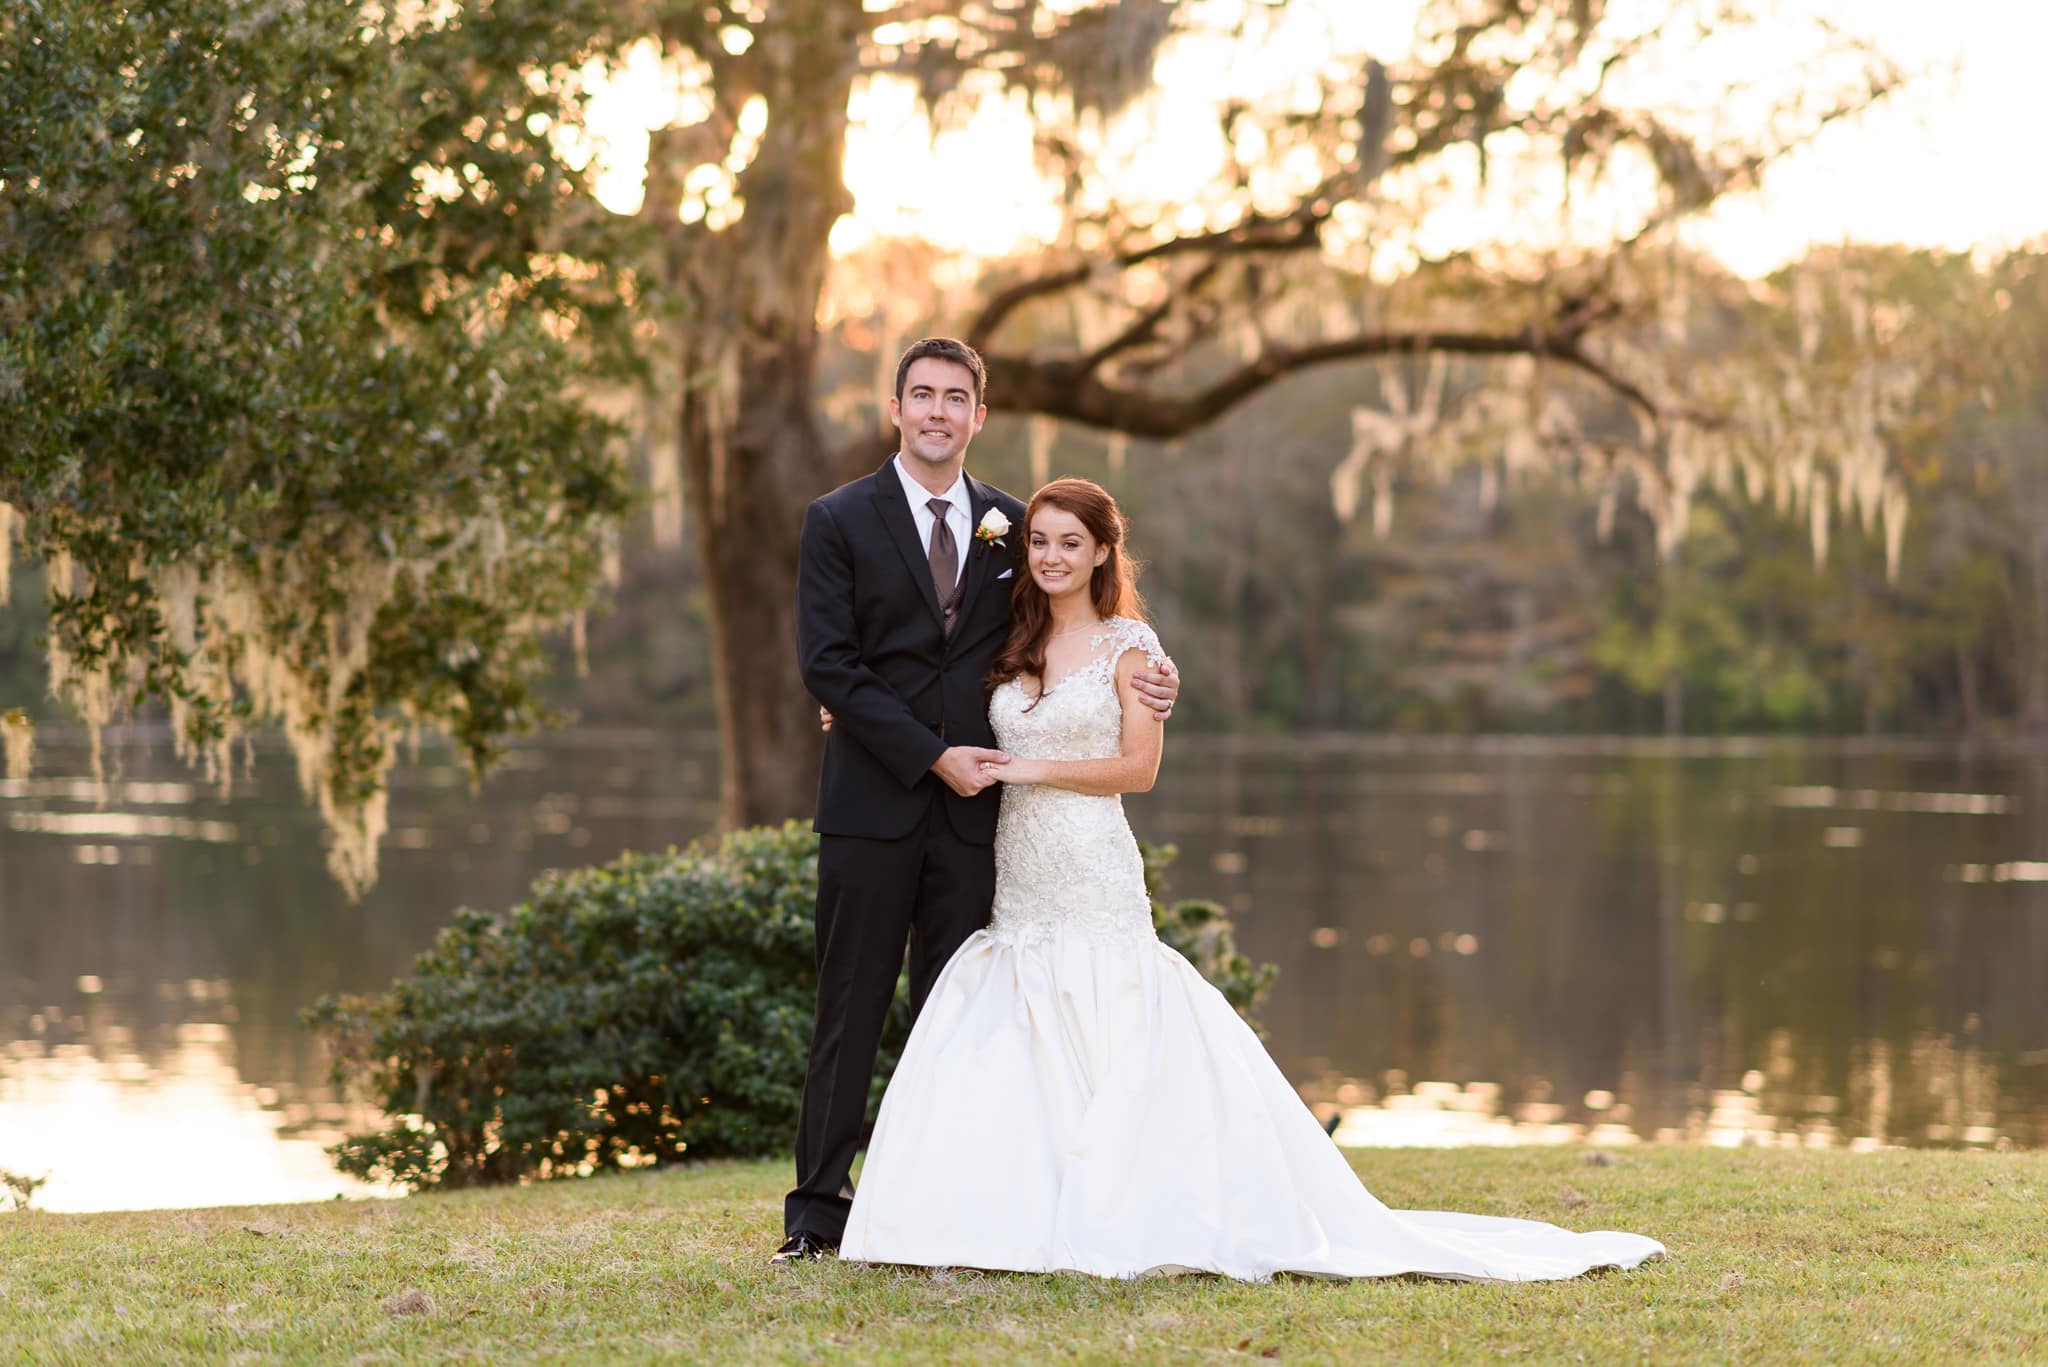 Couple in front of the river at sunset - Wachesaw Plantation